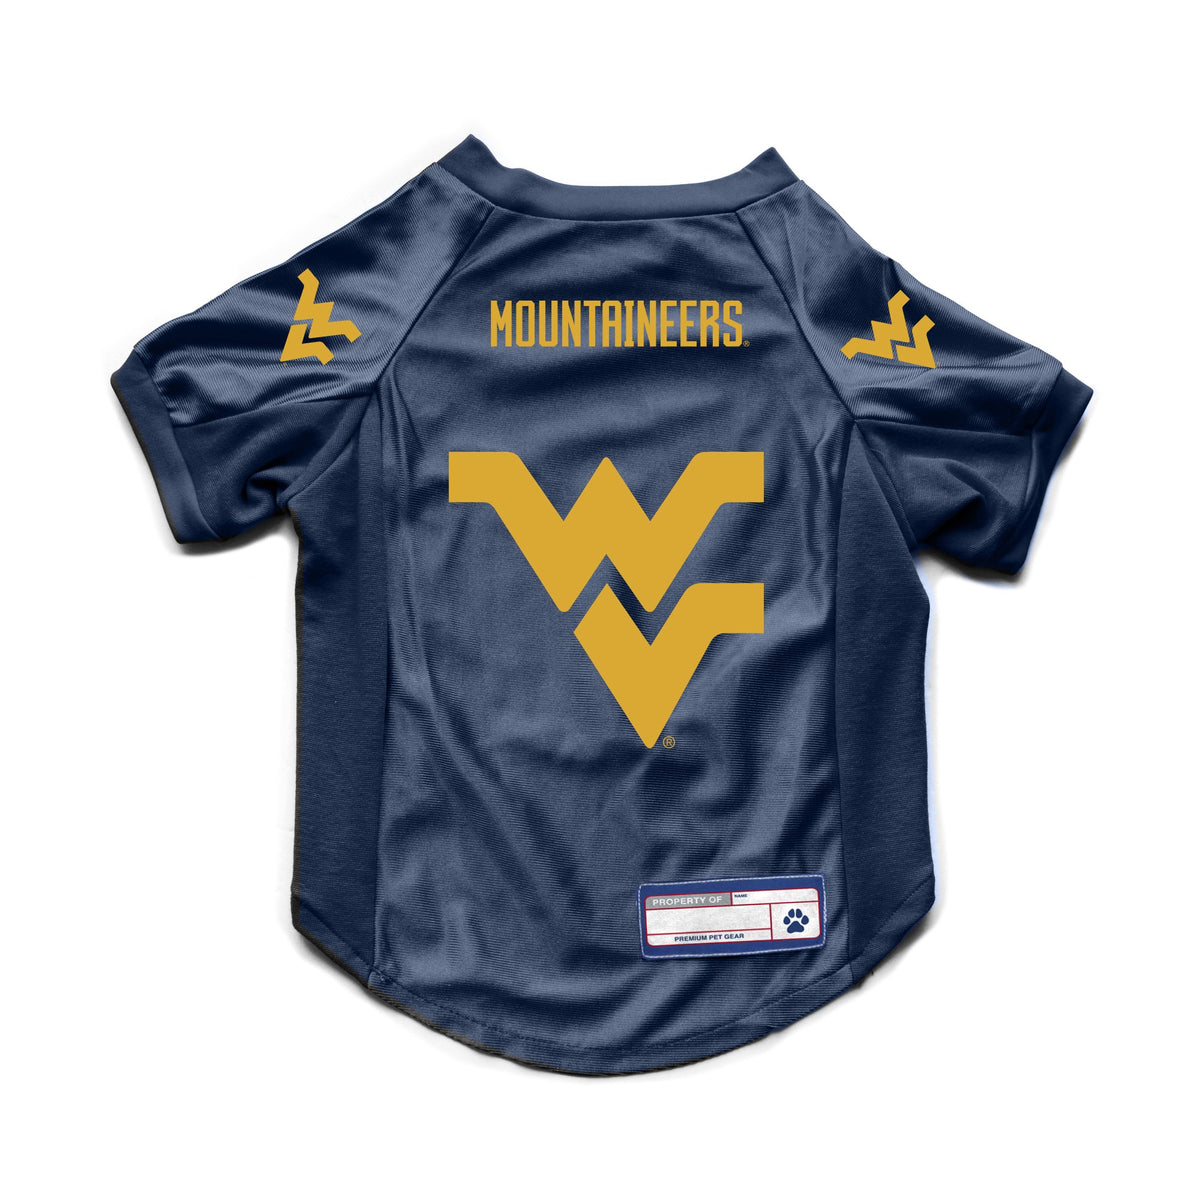 WV Mountaineers Stretch Jersey - 3 Red Rovers